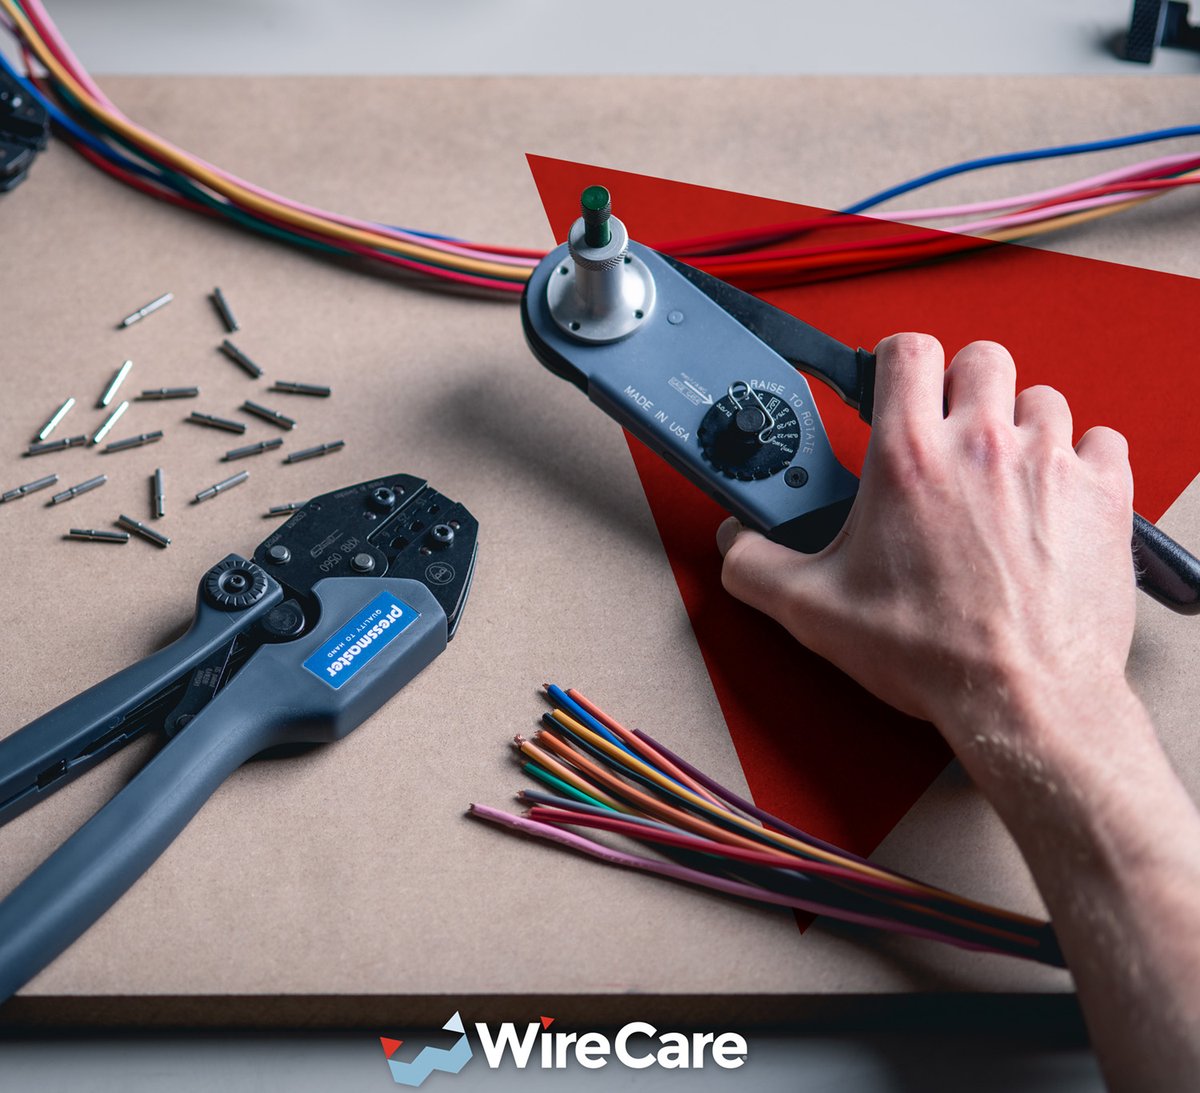 Did you know that WireCare® offers rental tools? (including crimping tools) #WireCare #Tools #WireCrimper #WireCrimping #CrimpTool #Wiring #Electrical